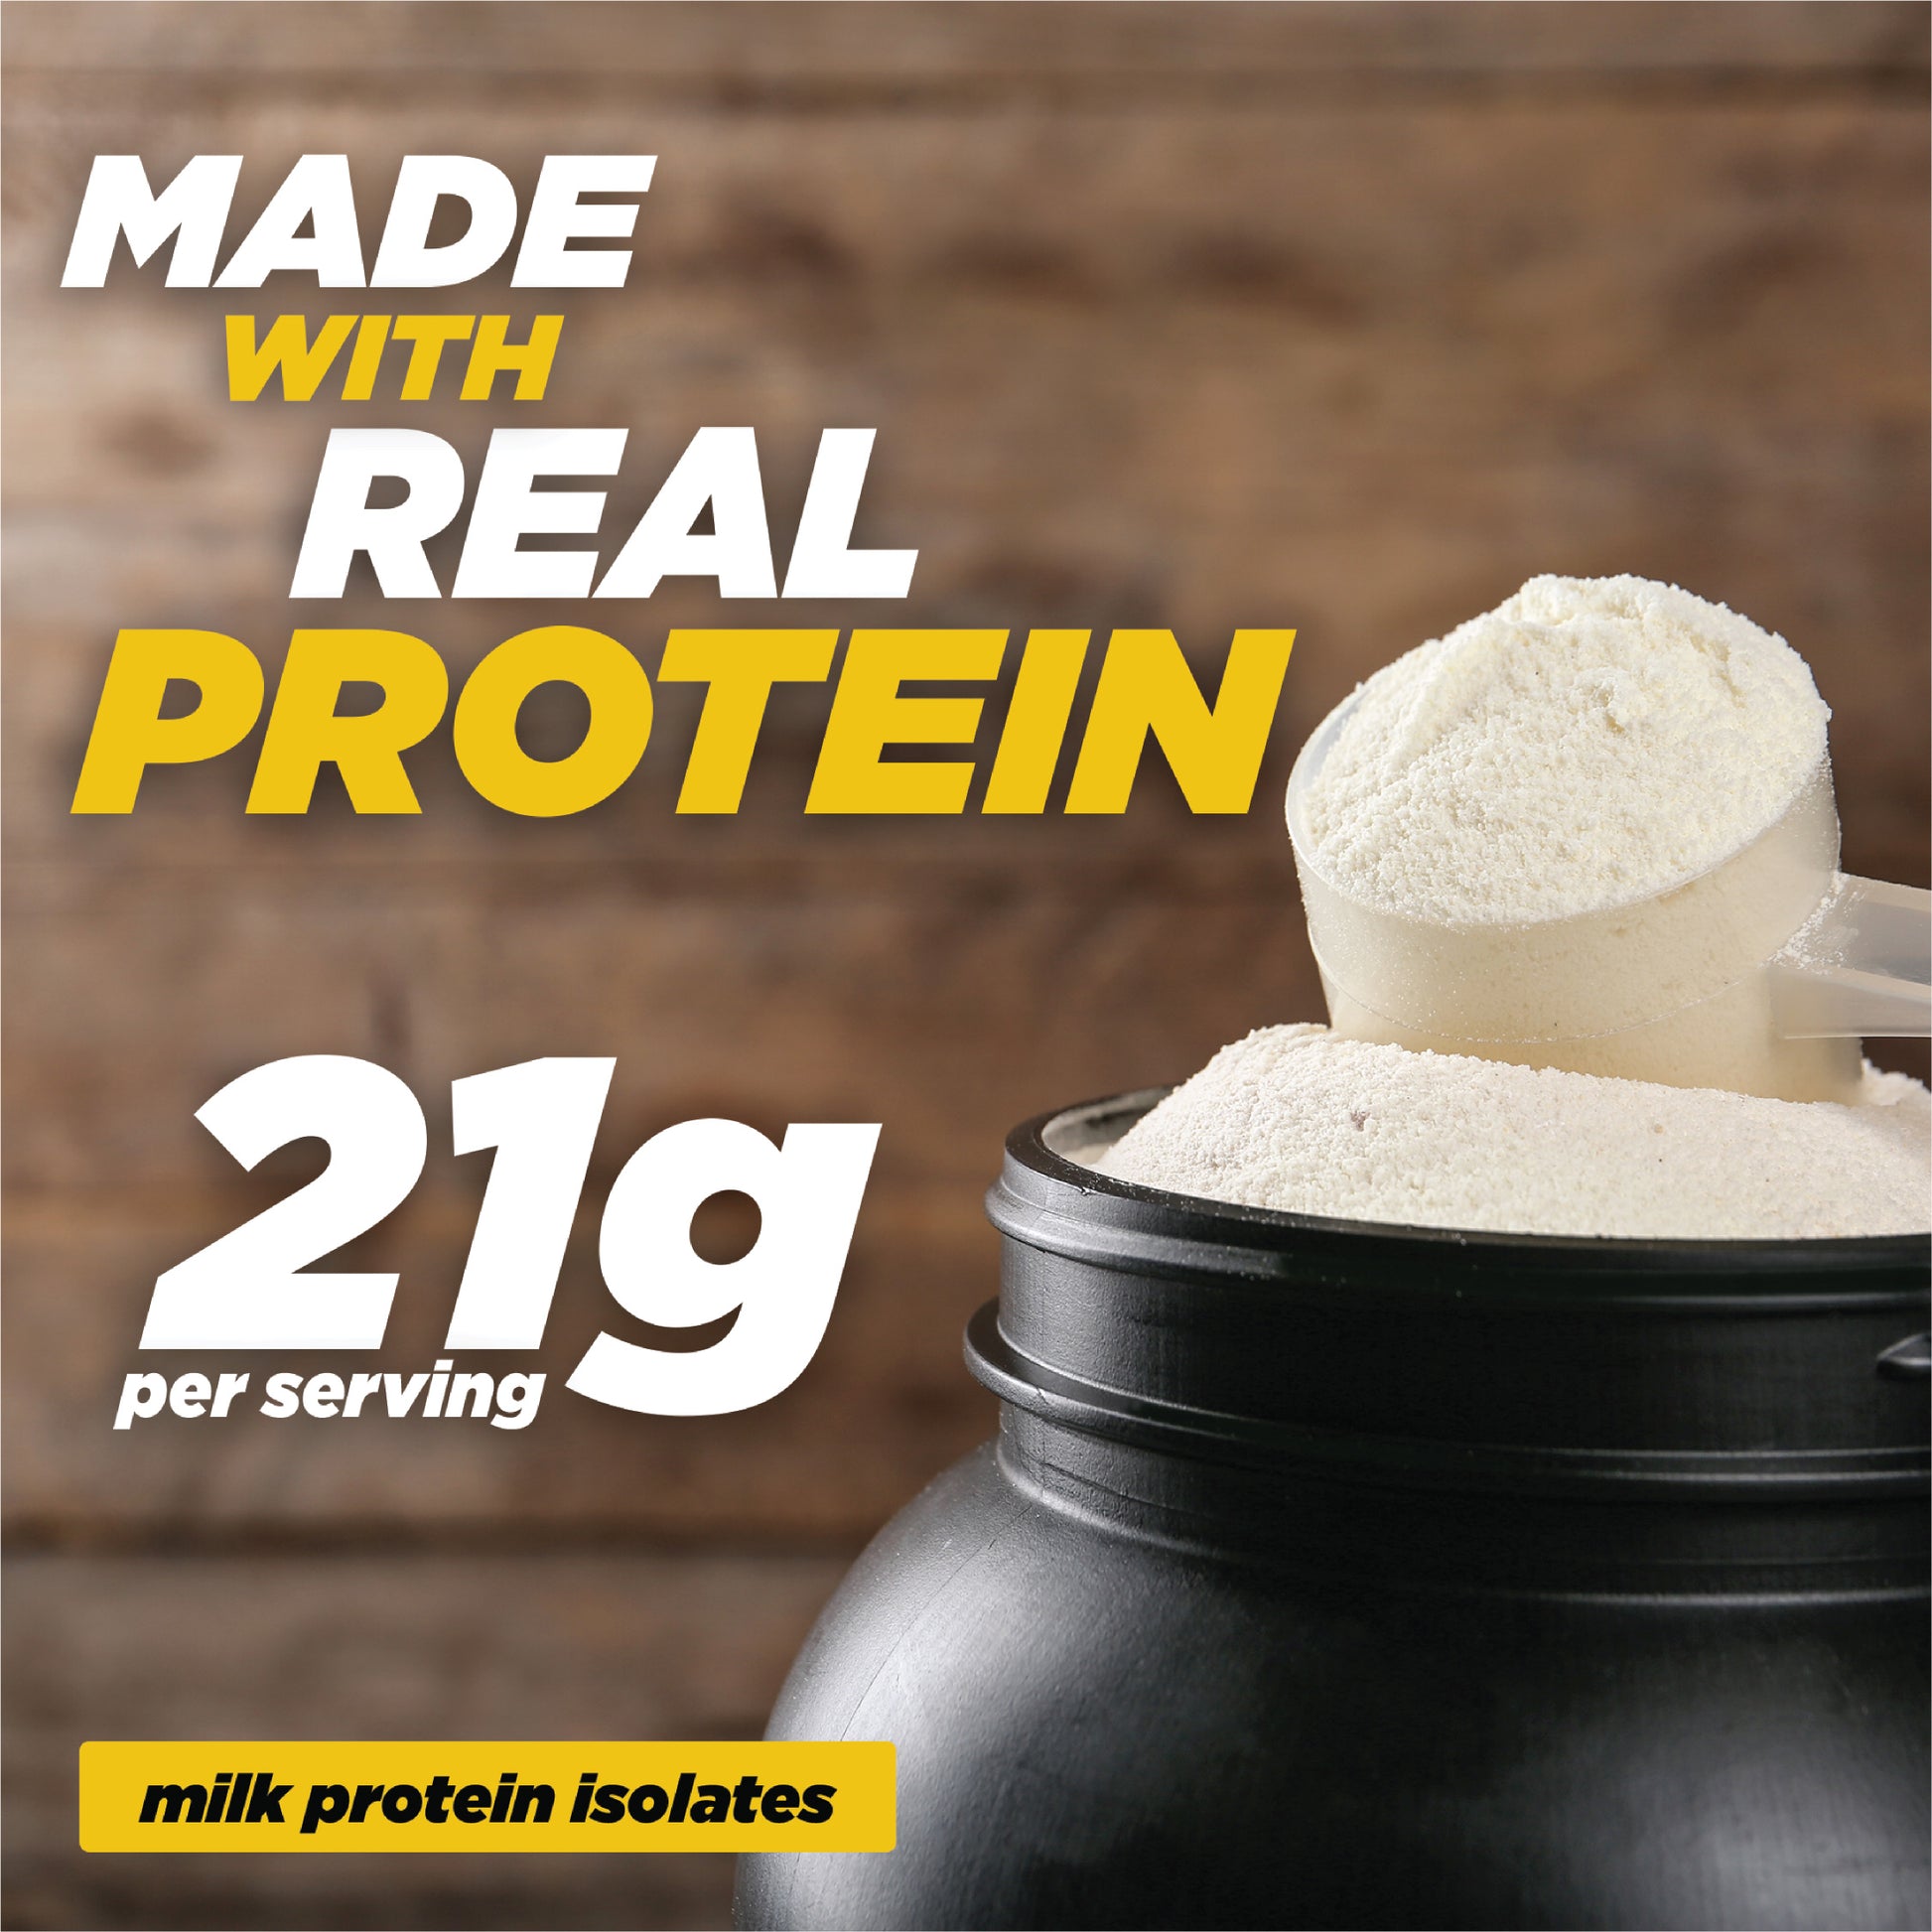 Made With Real Protein, Milk Protein Isolate